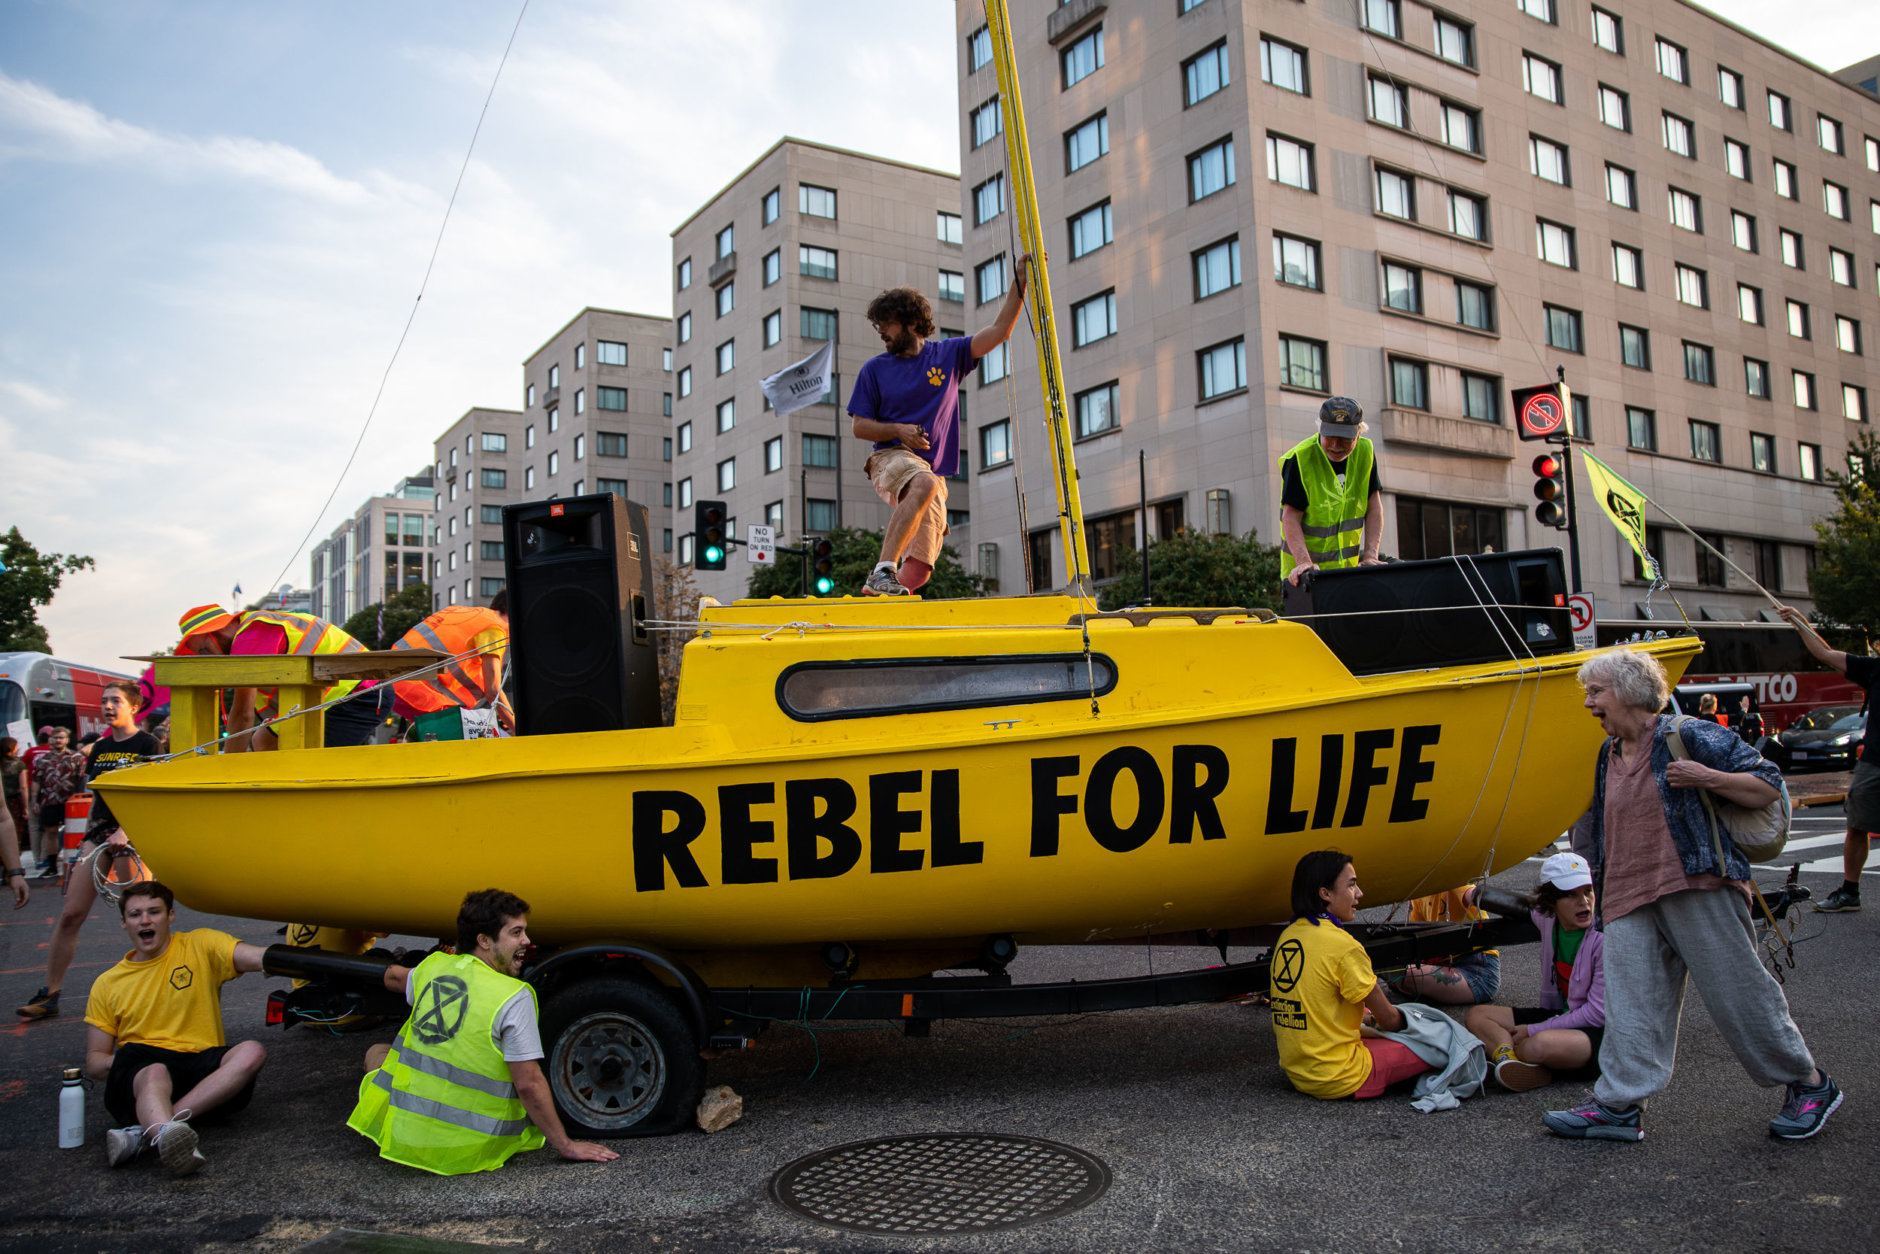 Protesters with Extinction Rebellion use a sailboat to block the intersection of K and 16th streets in downtown Washington, D.C. on Sept. 23, 2019. Environmental activists pressured lawmakers to declare a climate change emergency by paralyzing morning traffic in the nation's capital. (WTOP/Alejandro Alvarez)